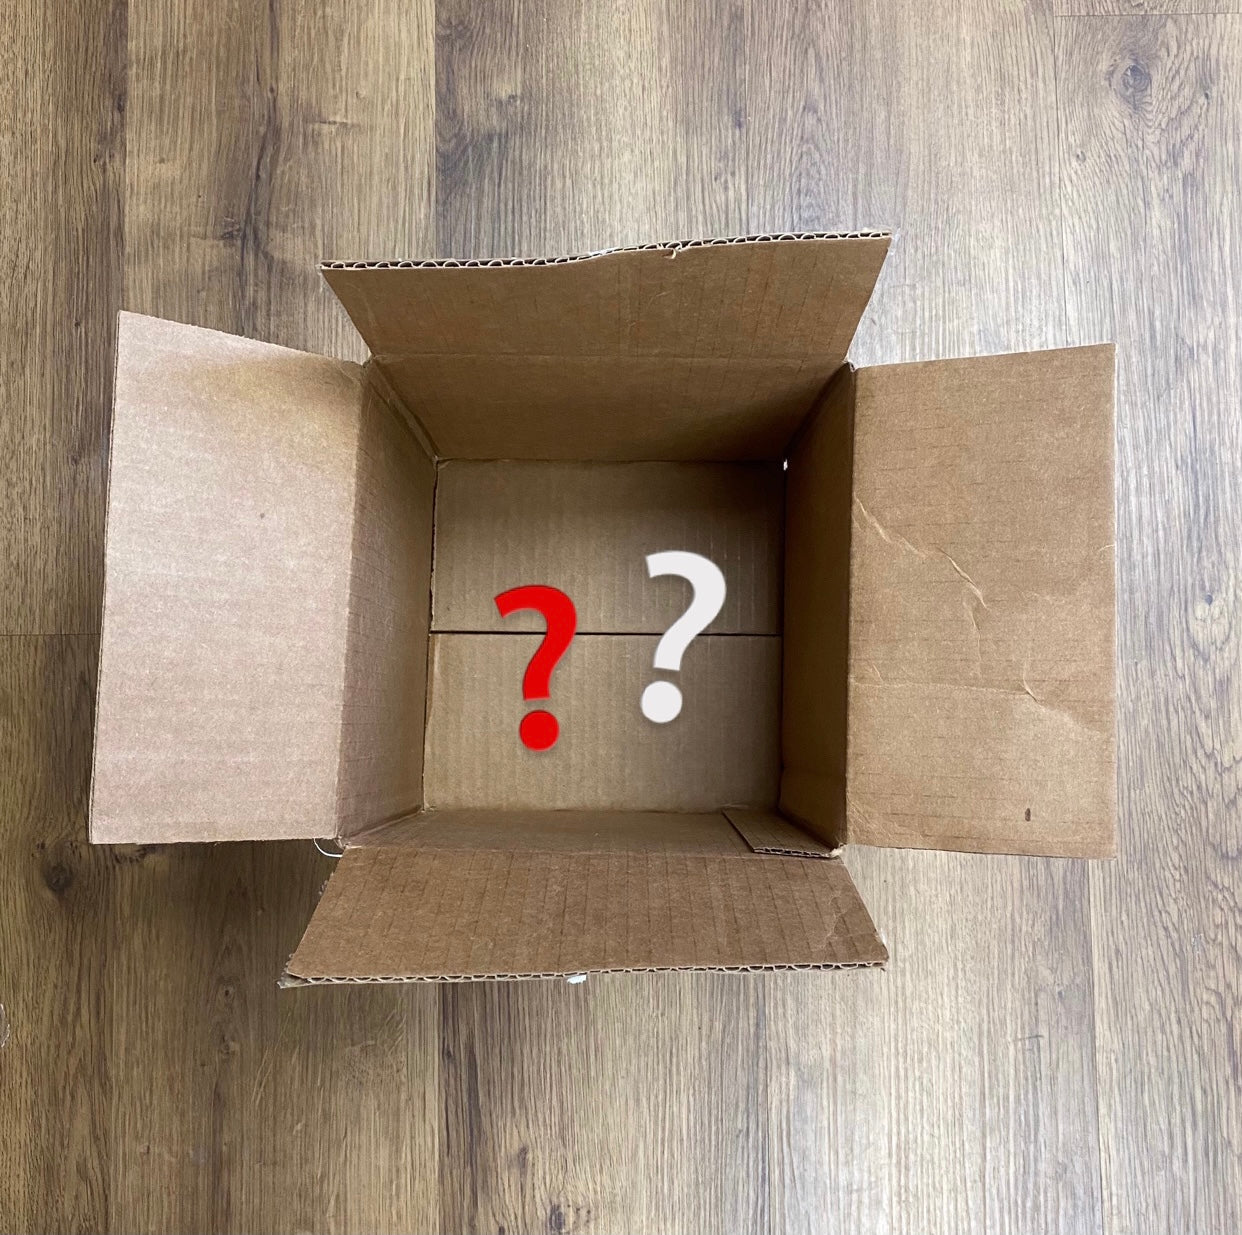 Naturals Collective "Mystery Box" BLACK FRIDAY Edition (2)